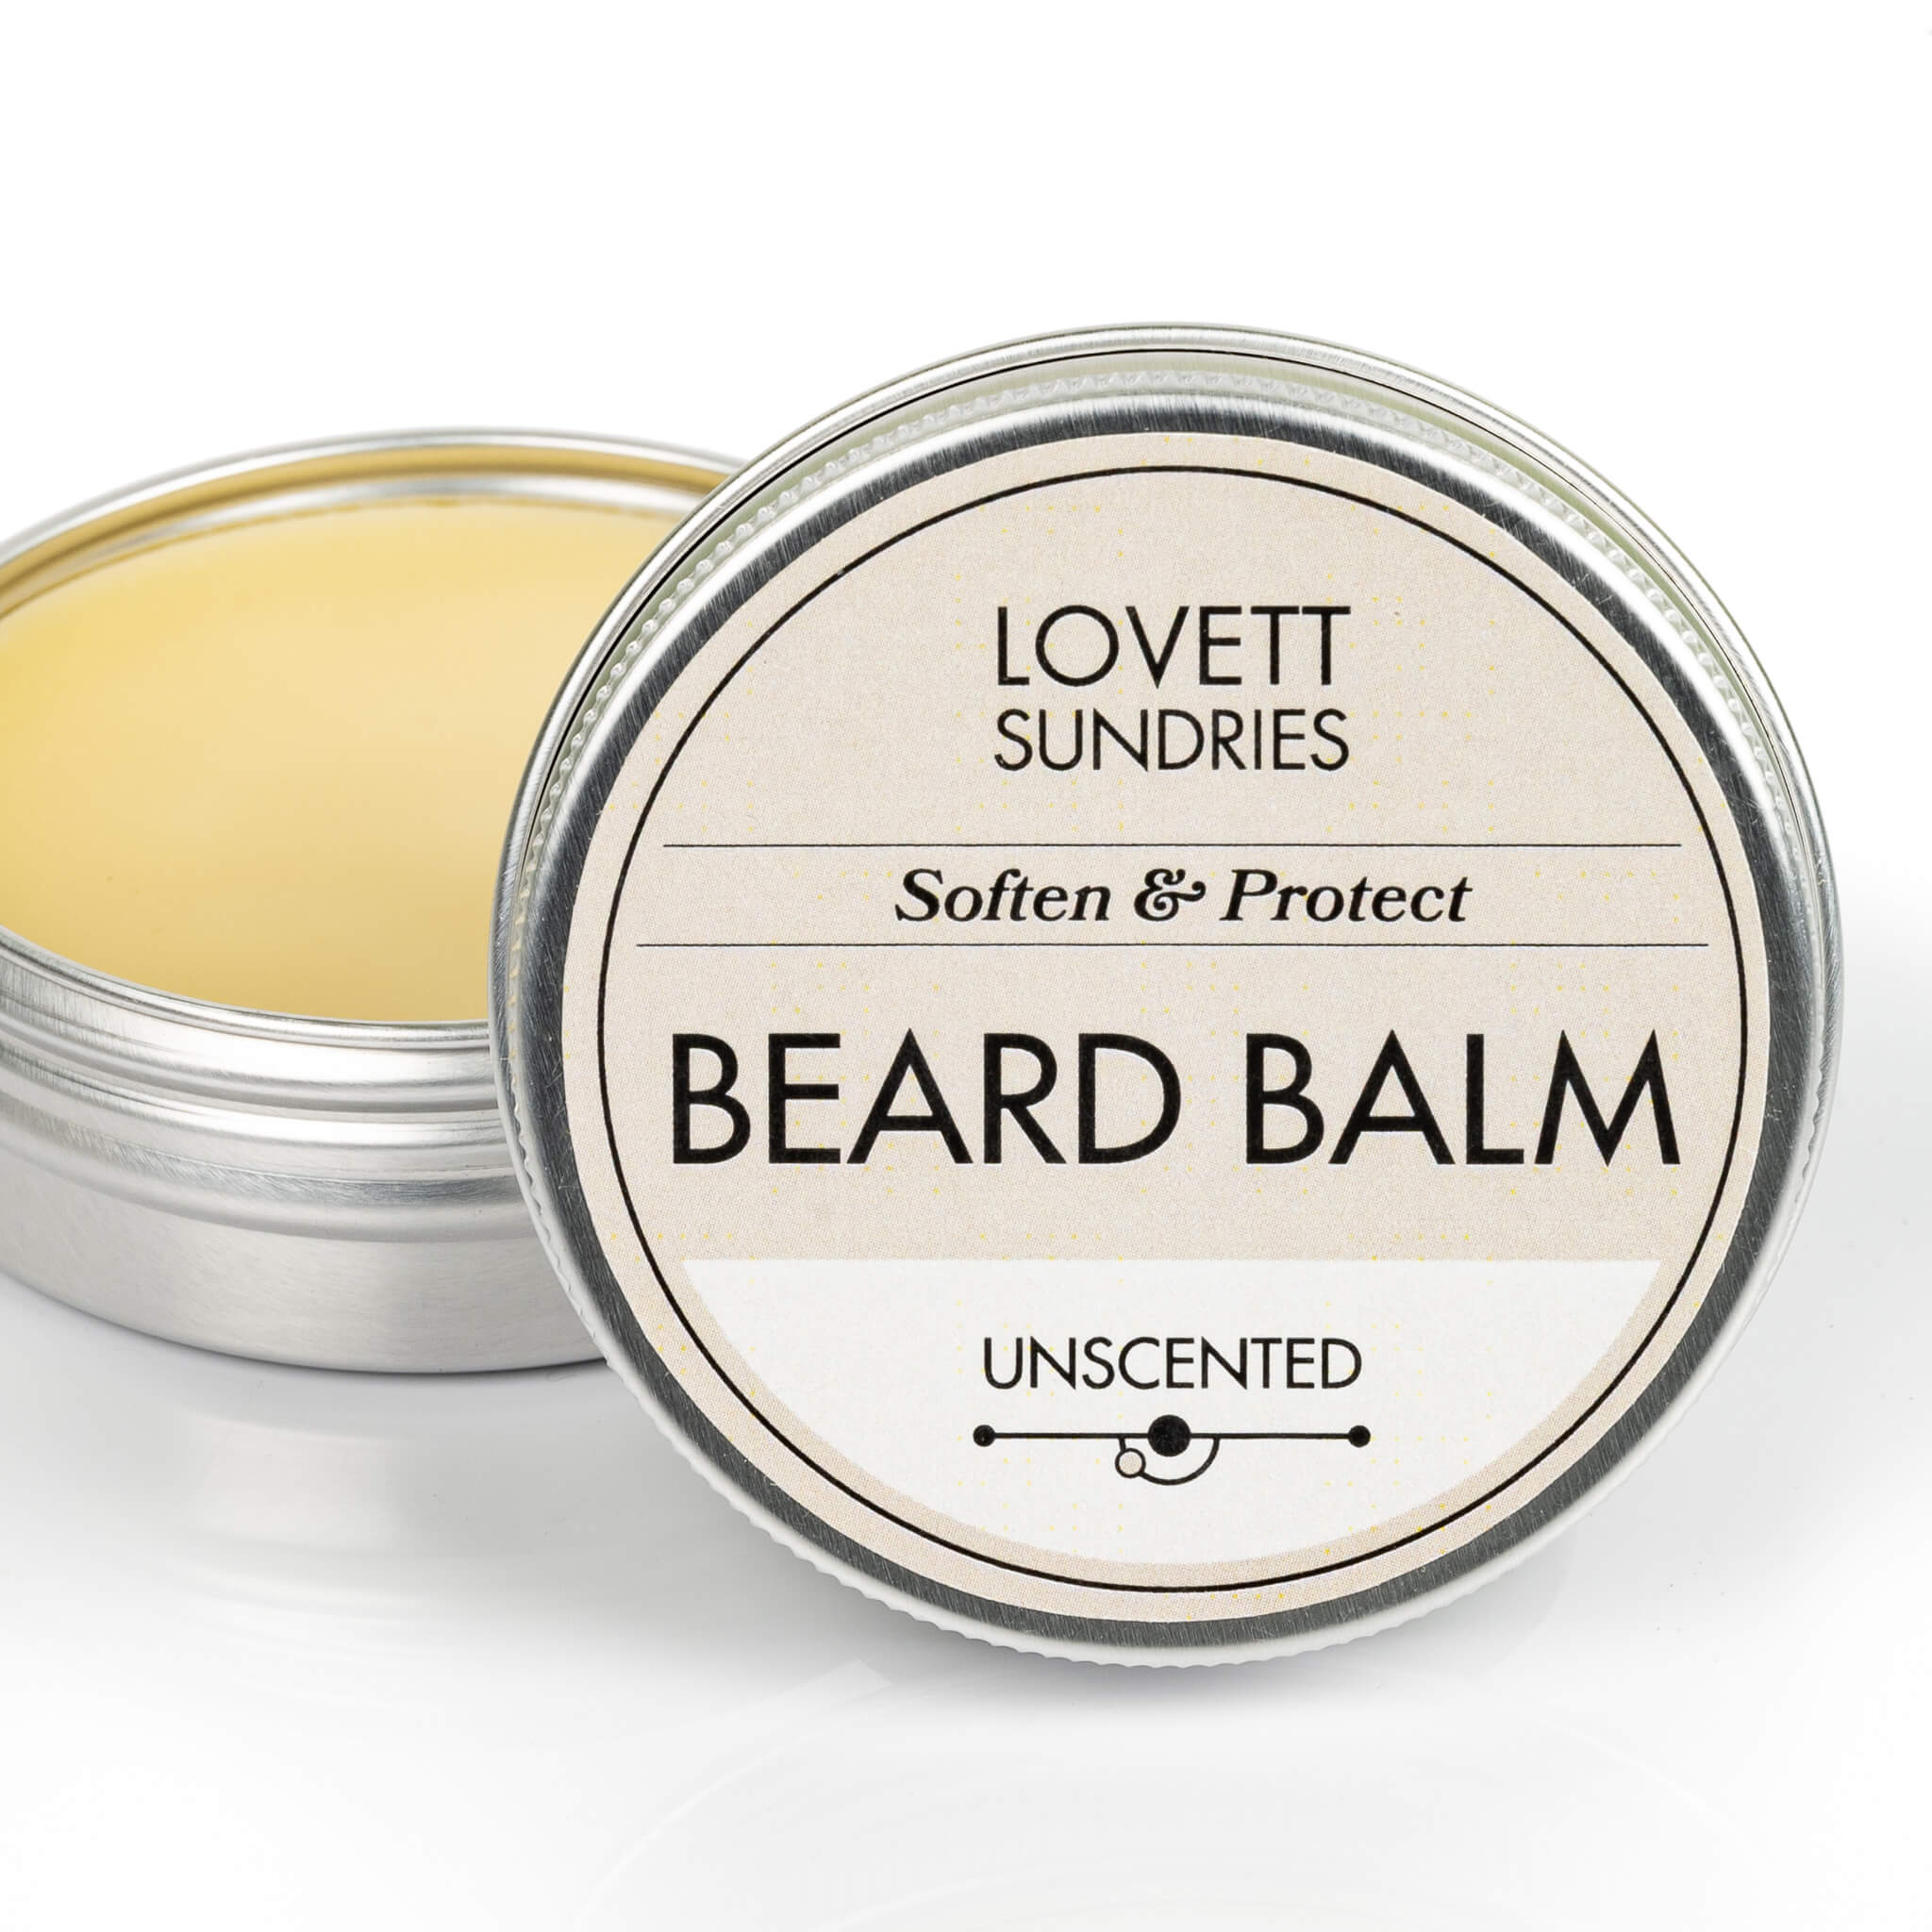 Tin of all natural conditioning and styling unscented beard balm.